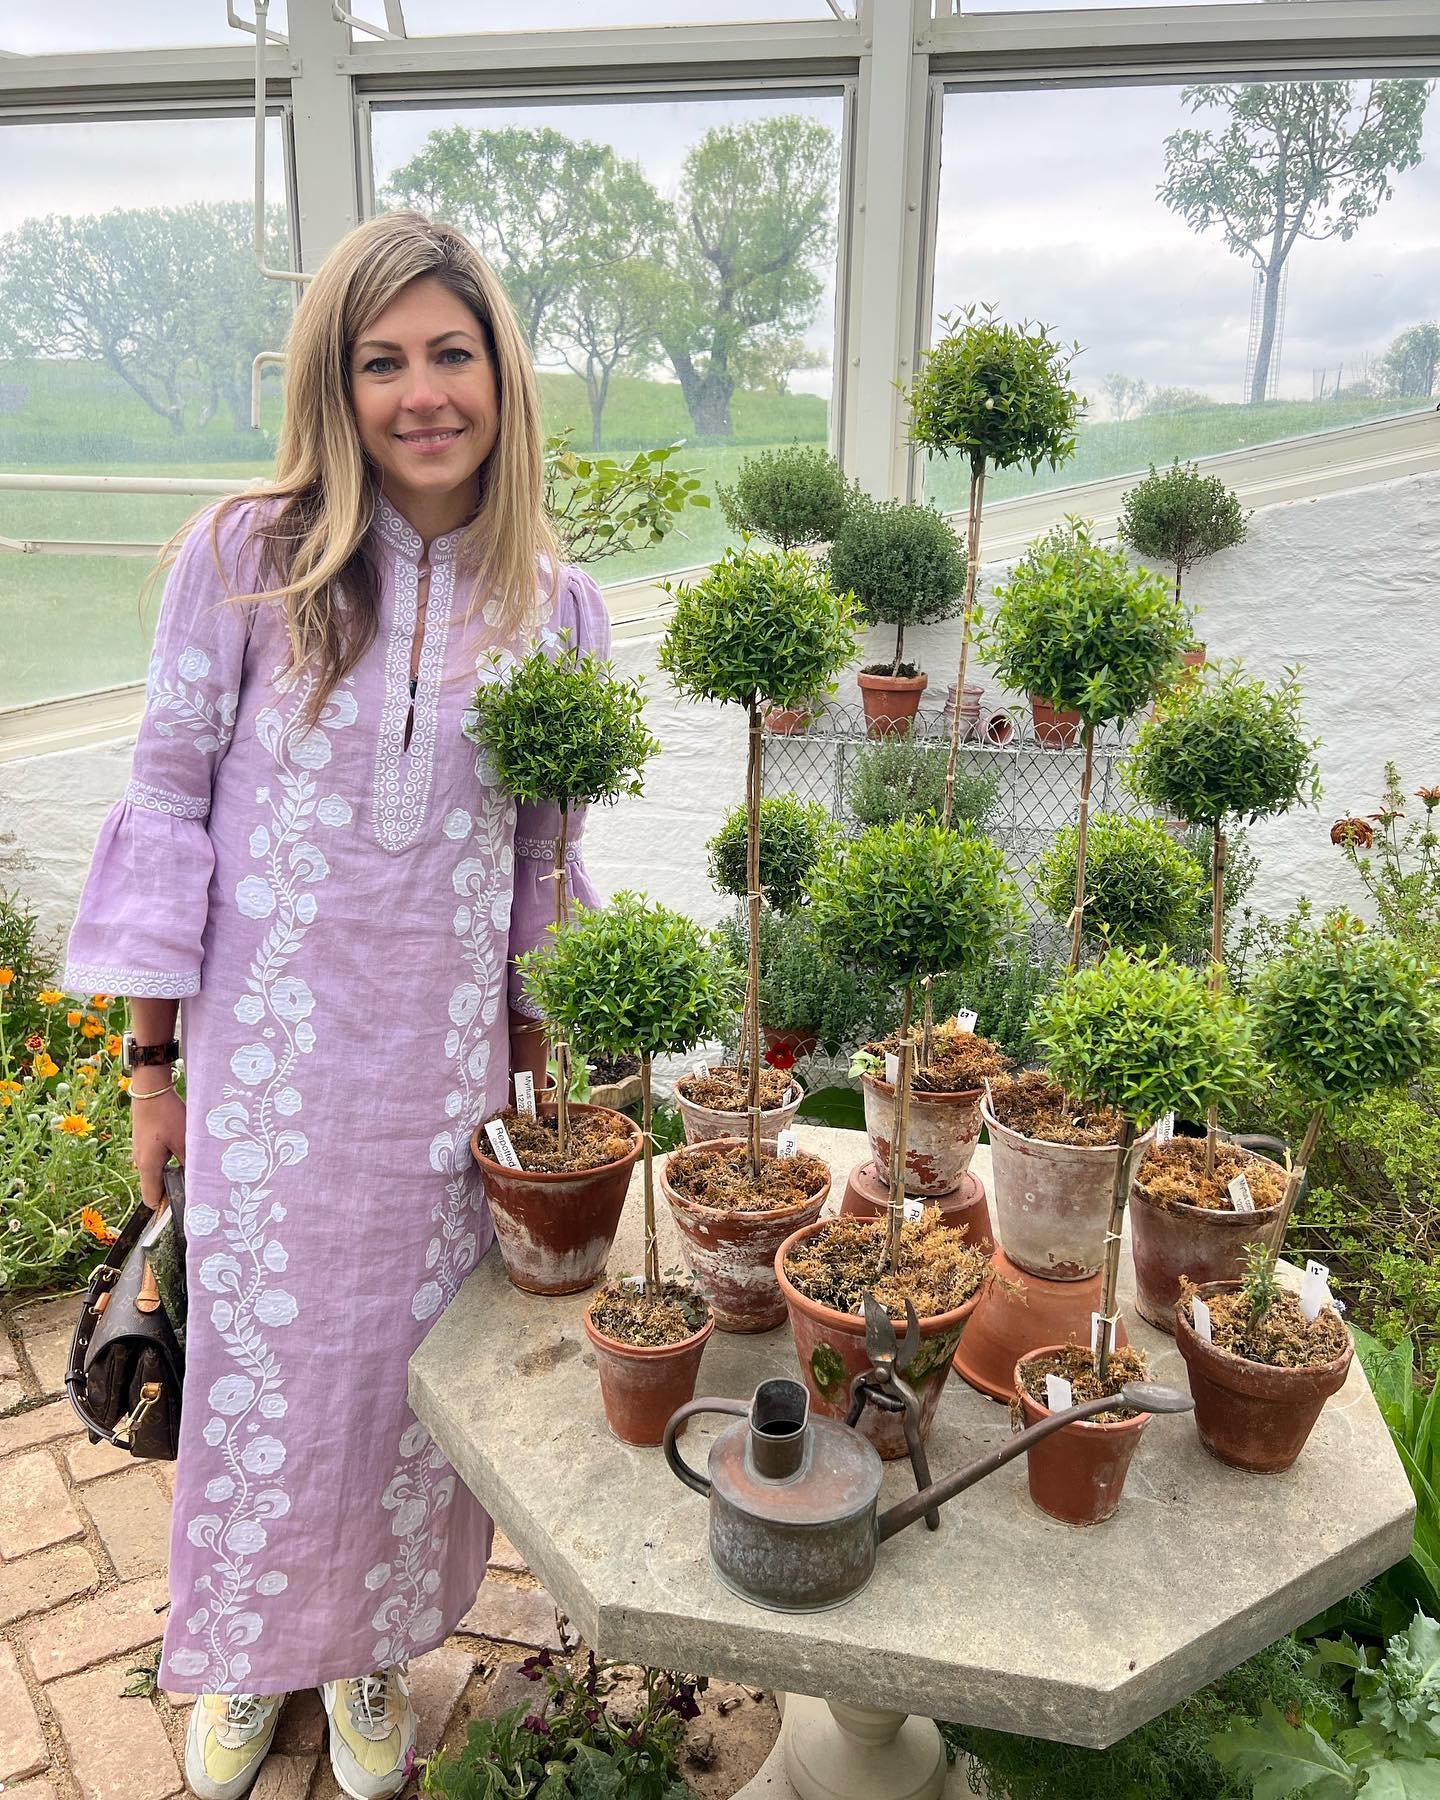 Amazing day seeking inspiration at Bunny Mellon&rsquo;s Oak Spring for Garden Week. 🌳 Her eye for beauty is evident in every little detail of her property and the @oakspringfoundation is flourishing. We finished the day @naturecomposed to bring home